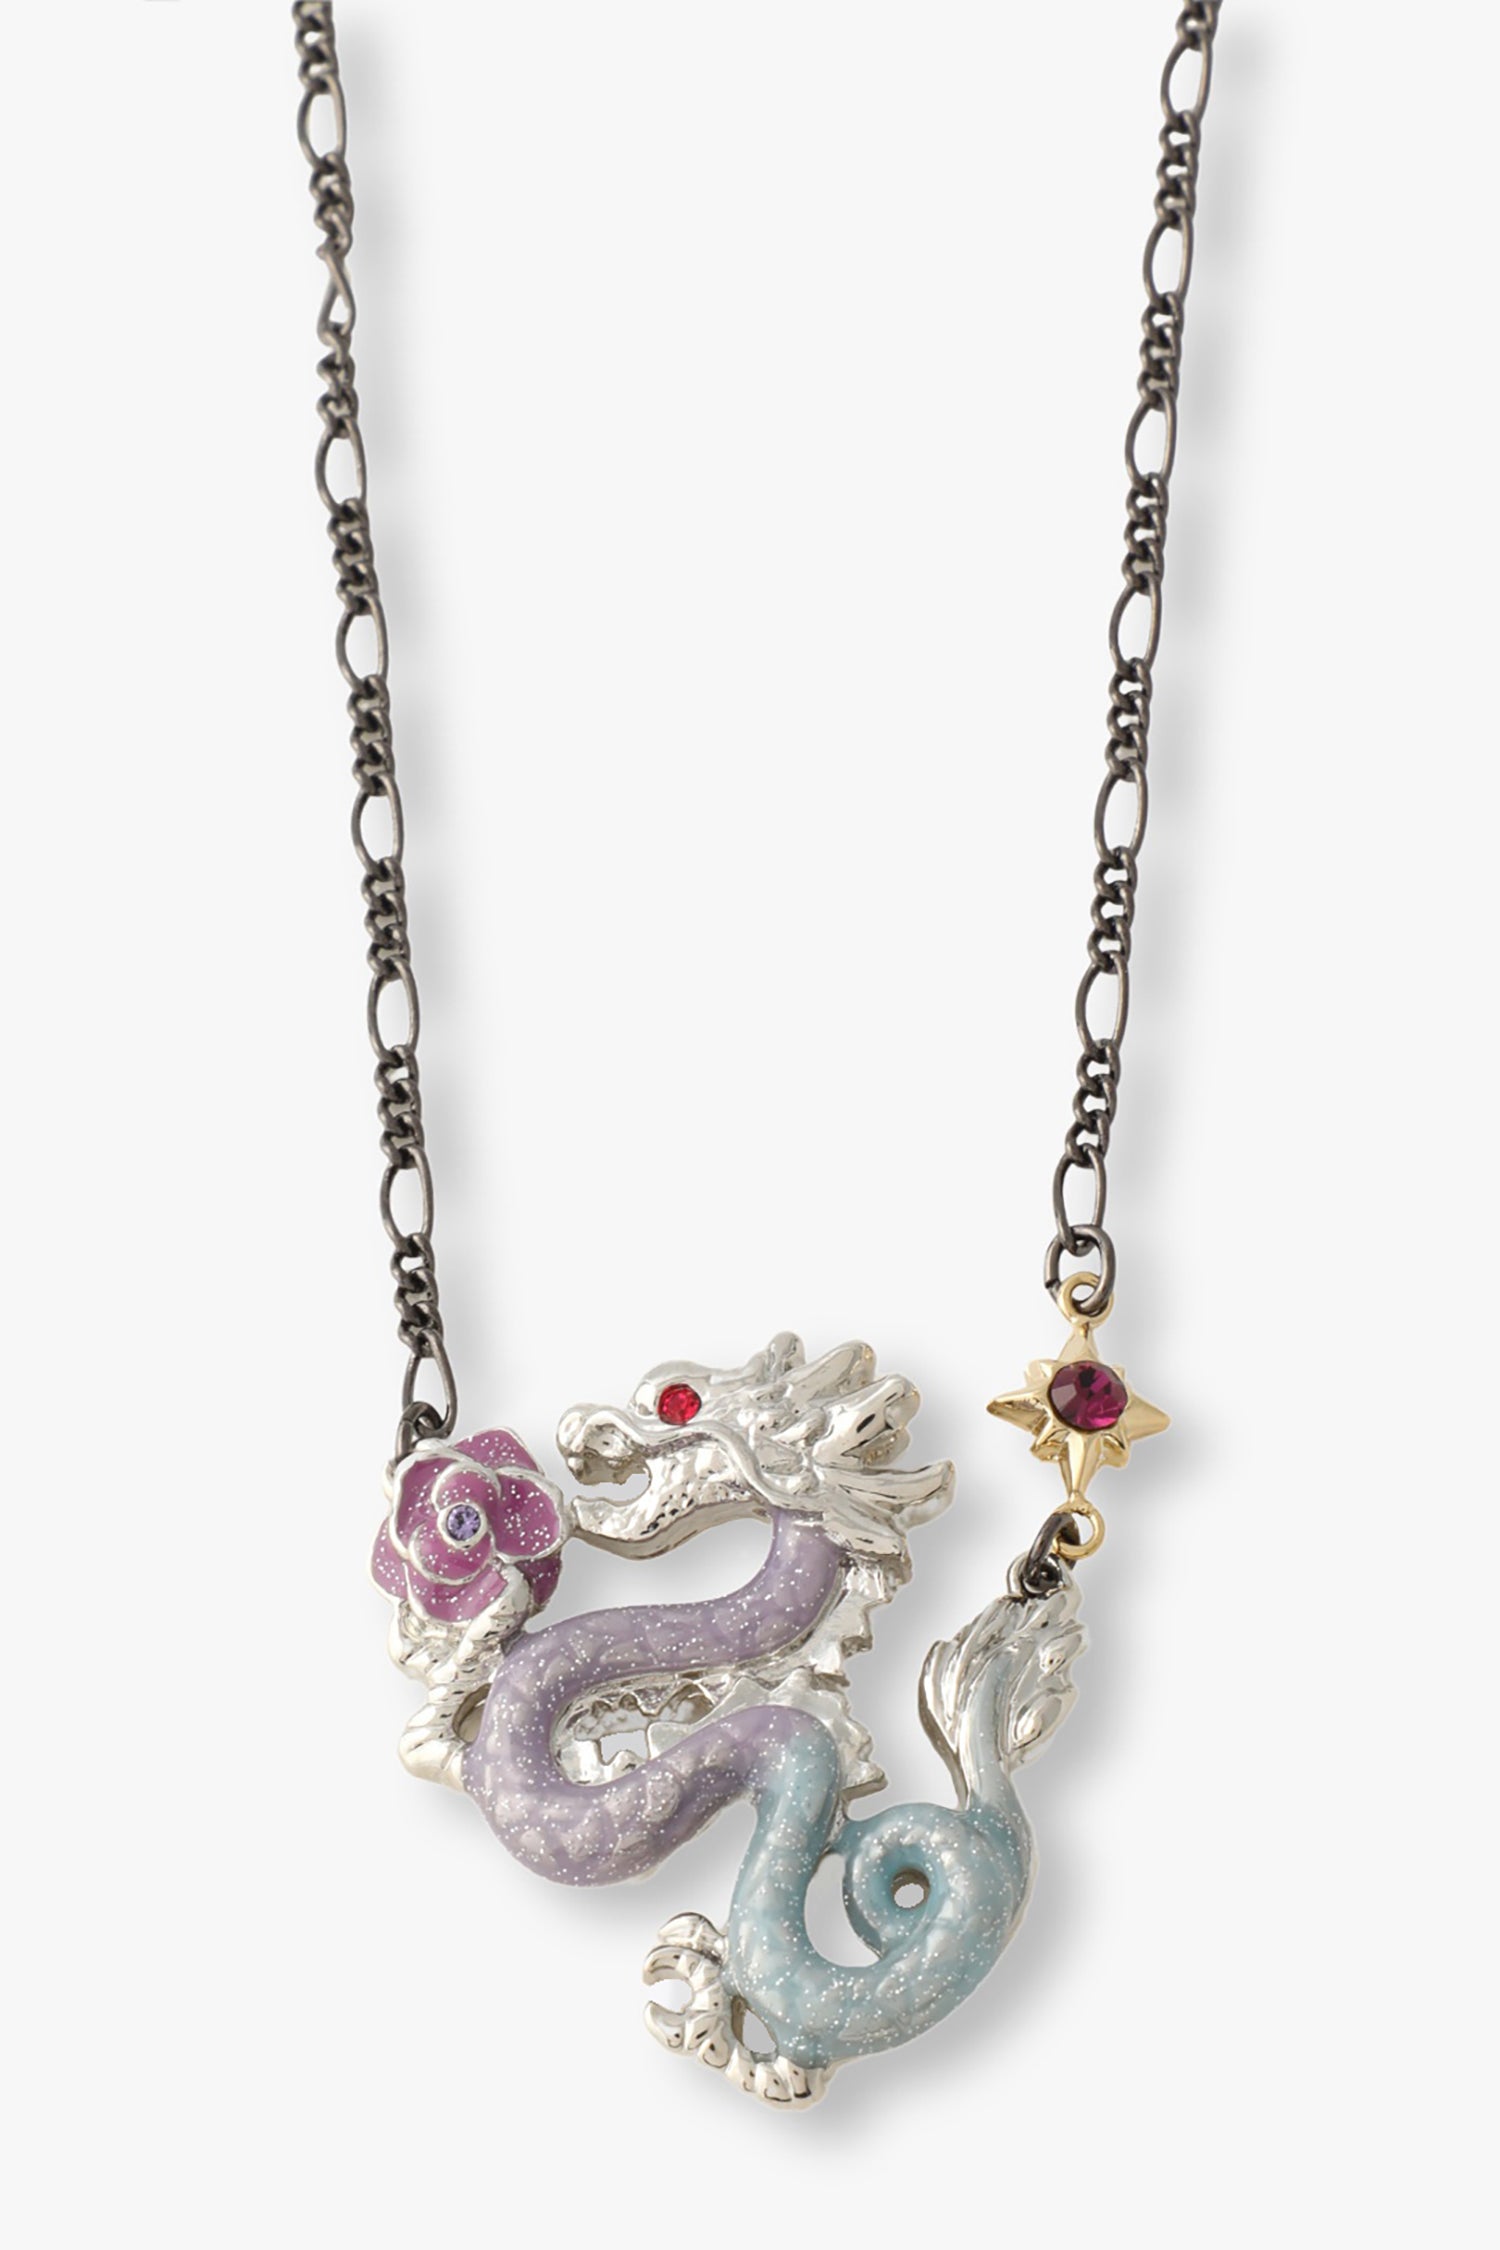 Dragon Zodiac pendant, symbolic scales, tail flutters like flames, ruby eyes, with a star a rose